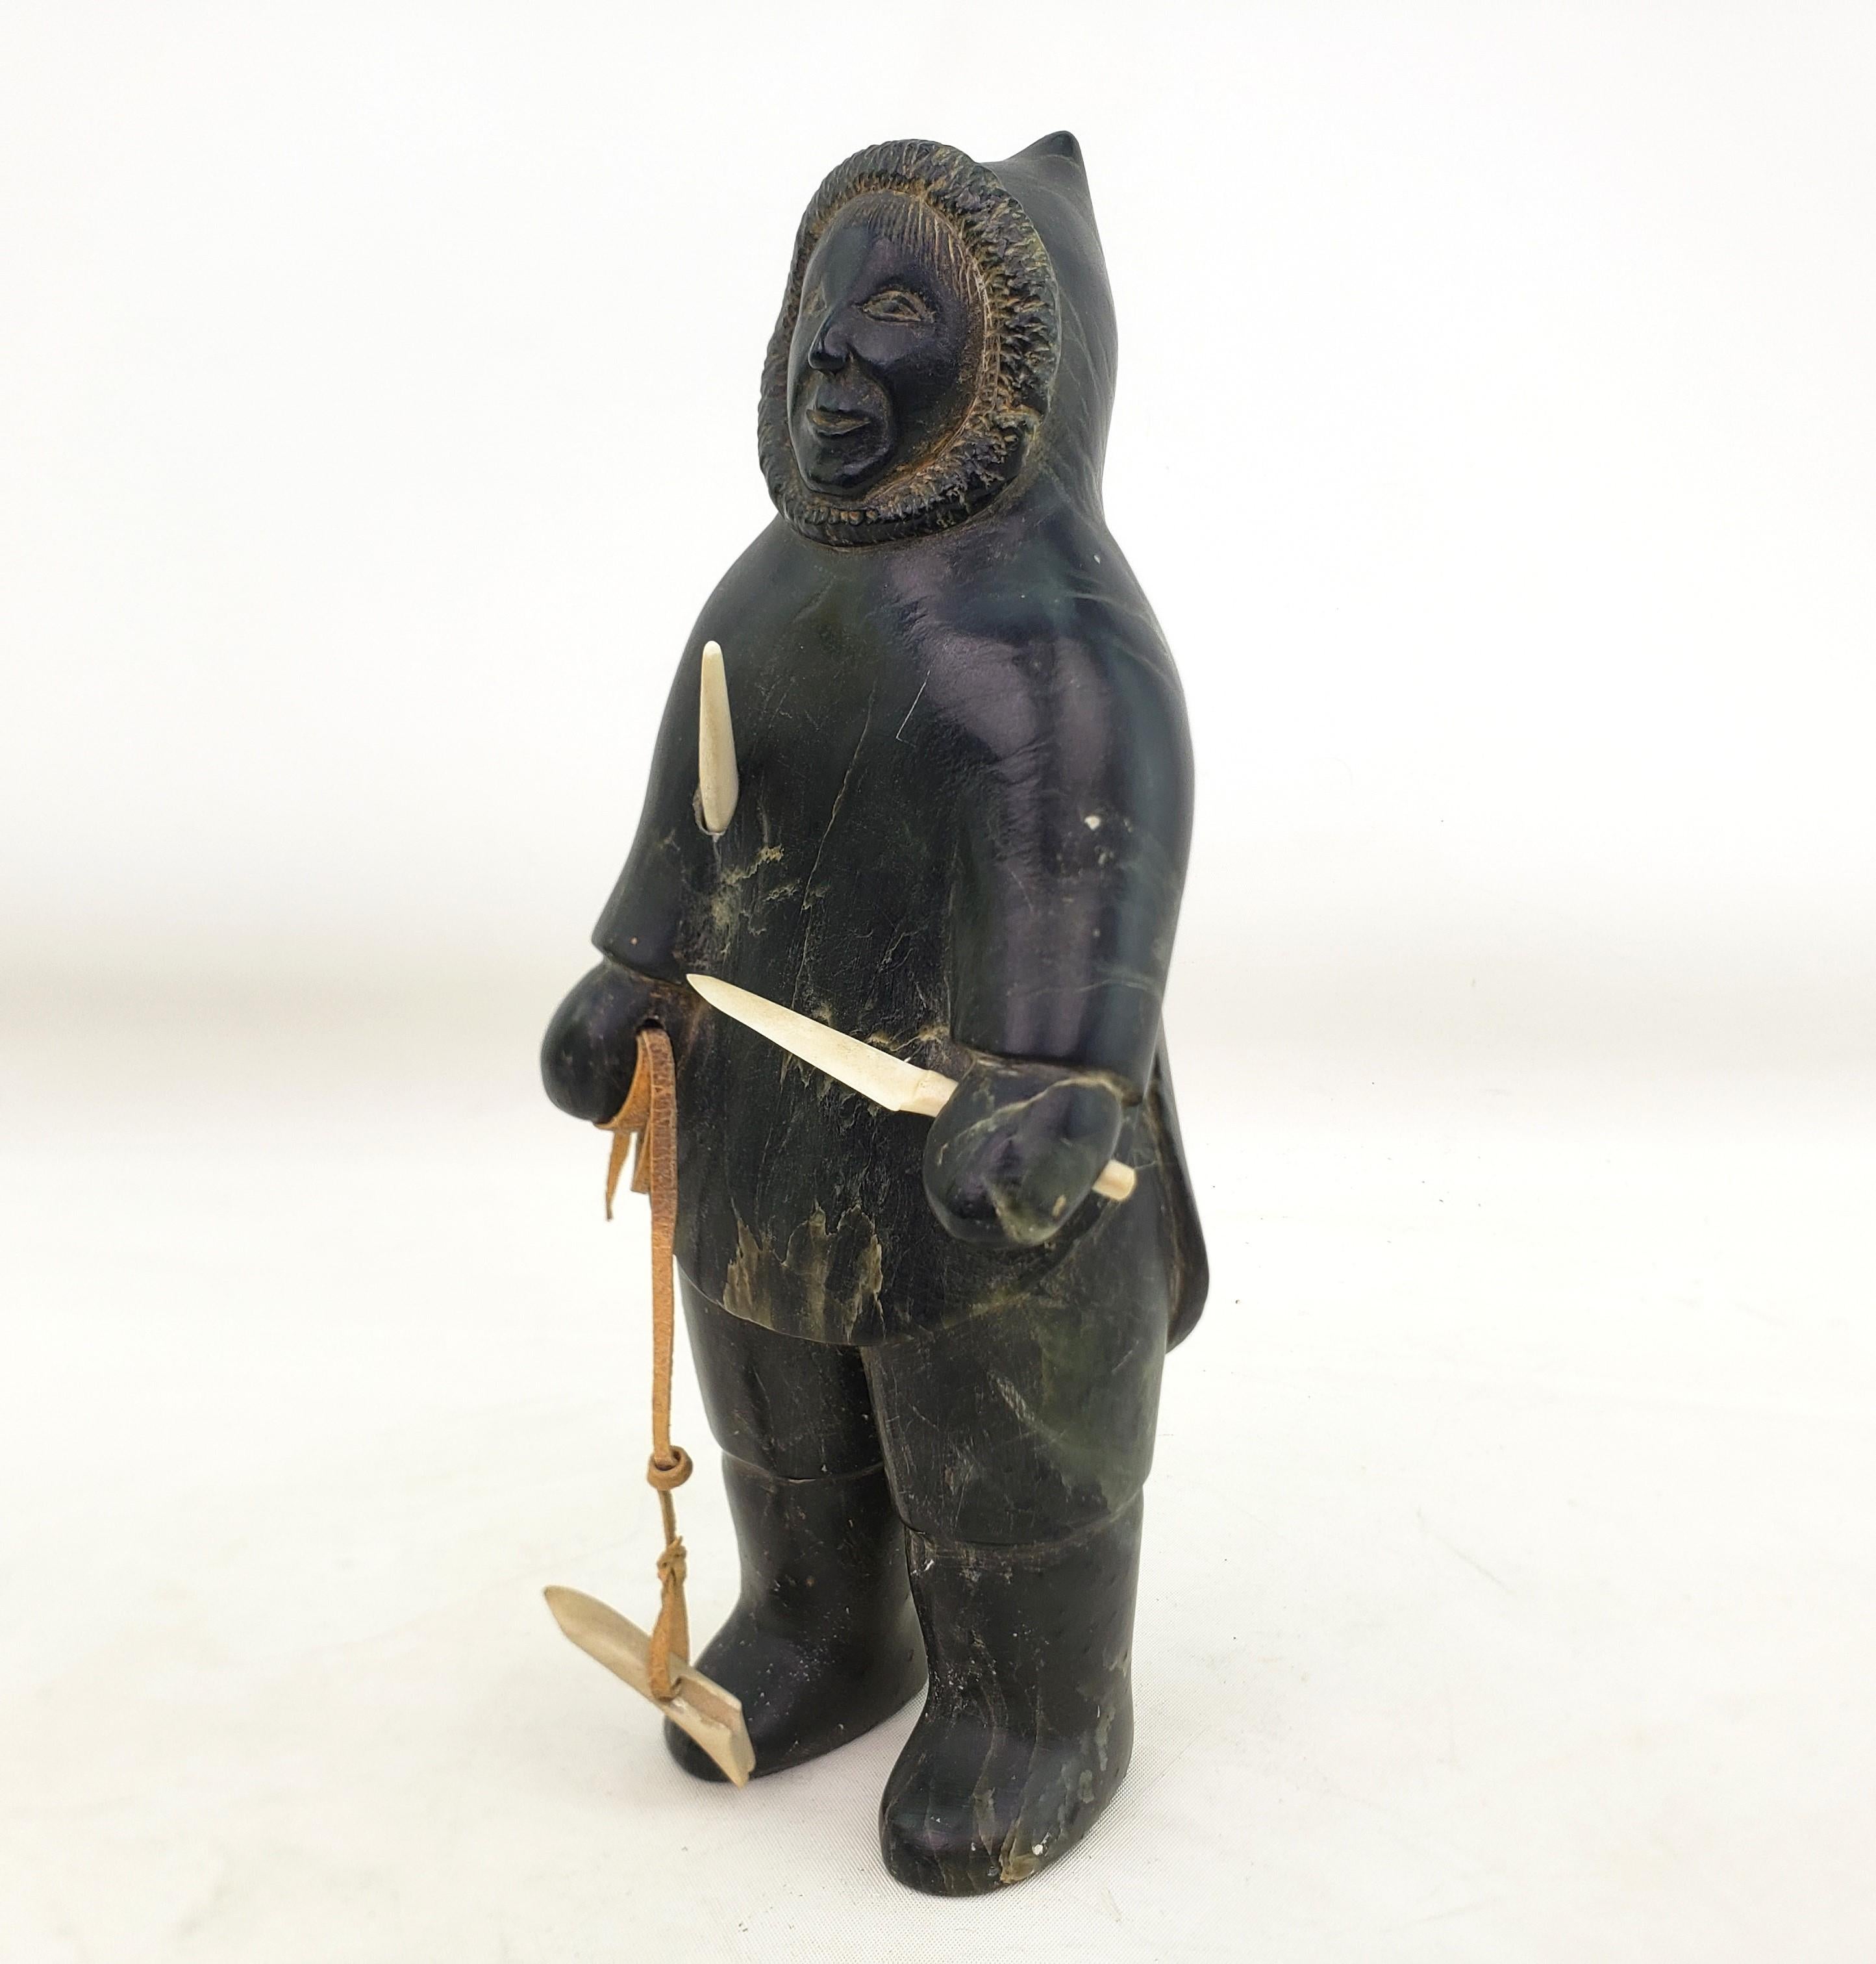 This well executed sculpture is signed by an unknown artist and originated from Canada and dates to approximately 1960 and done in the Mid-Century Inuit style. The sculpture is composed of soapstone and depicts an Inuit hunter with a spear and knife